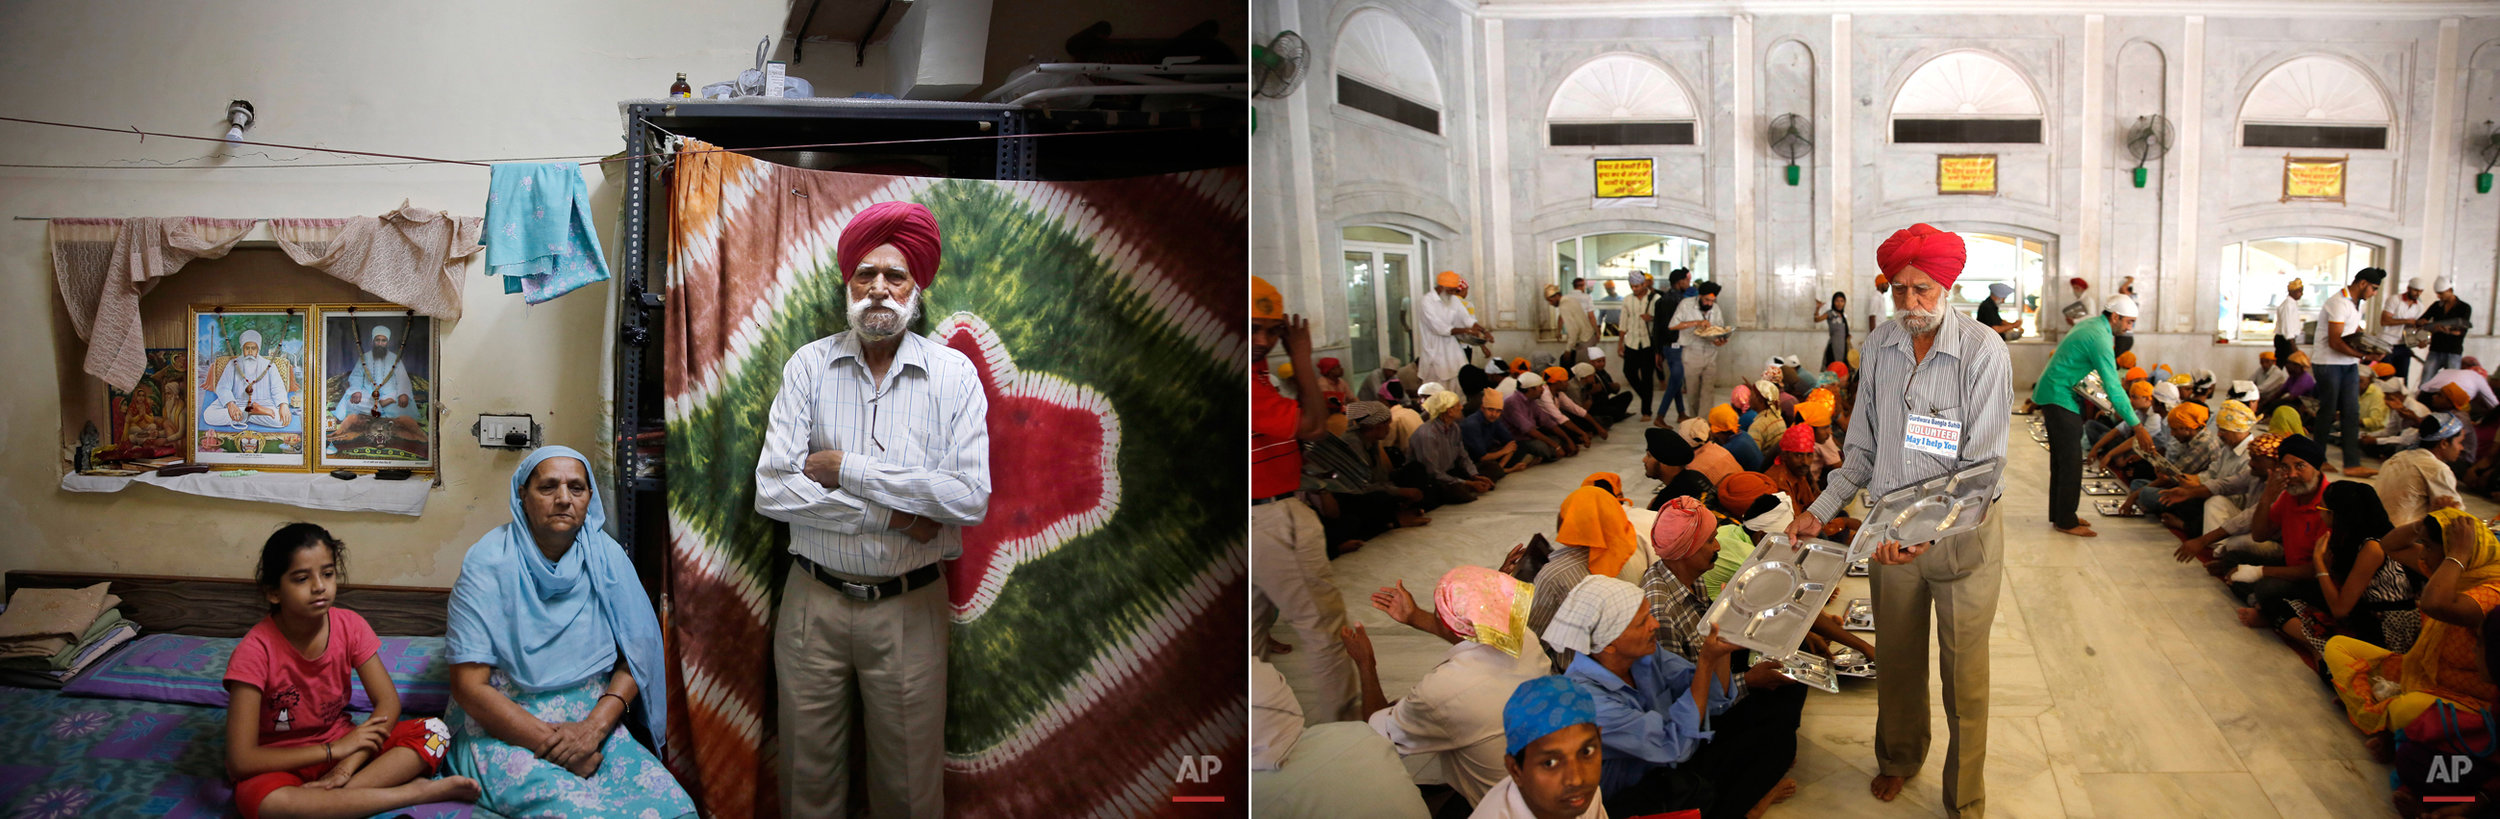  This two picture combo shows, on the left, Jaspal Singh,69, a retired carpenter, poses with his family at their house in New Delhi, India on May 28, 2015, as on right, he serves empty plates to devotees for langar, or free community meal, at the Ban